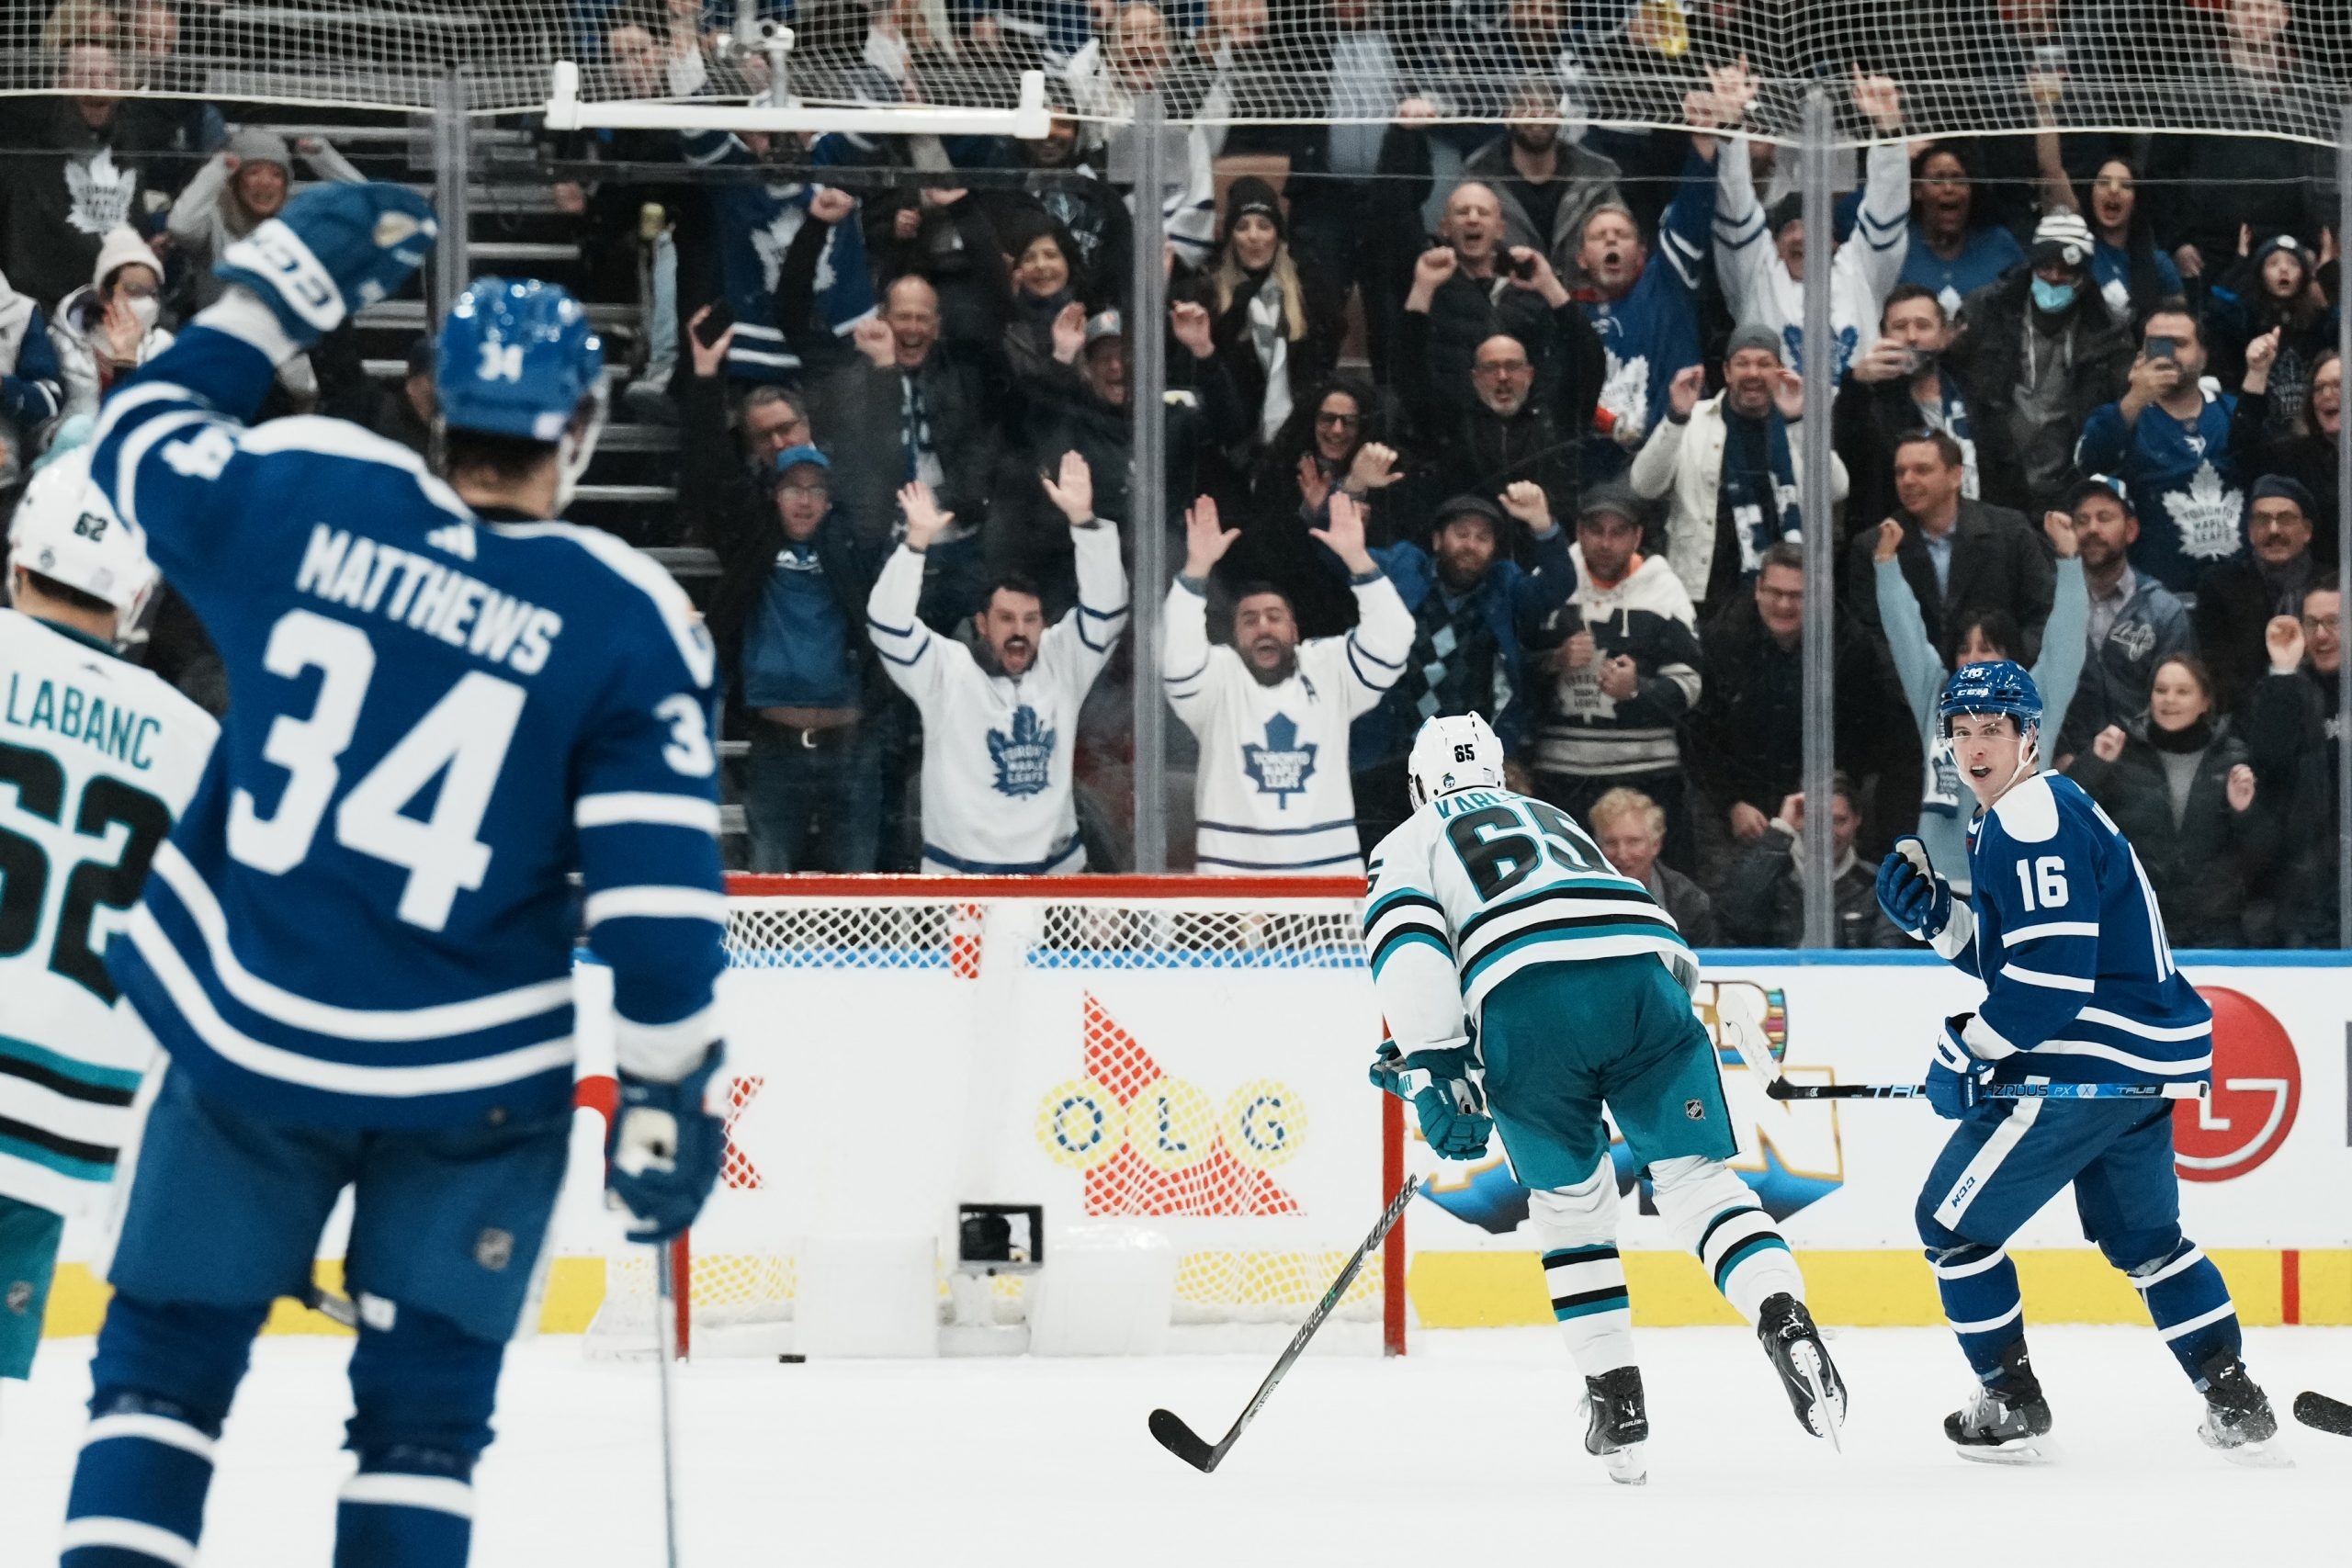 Mitch Marner ties record with point streak, Leafs beat Sharks